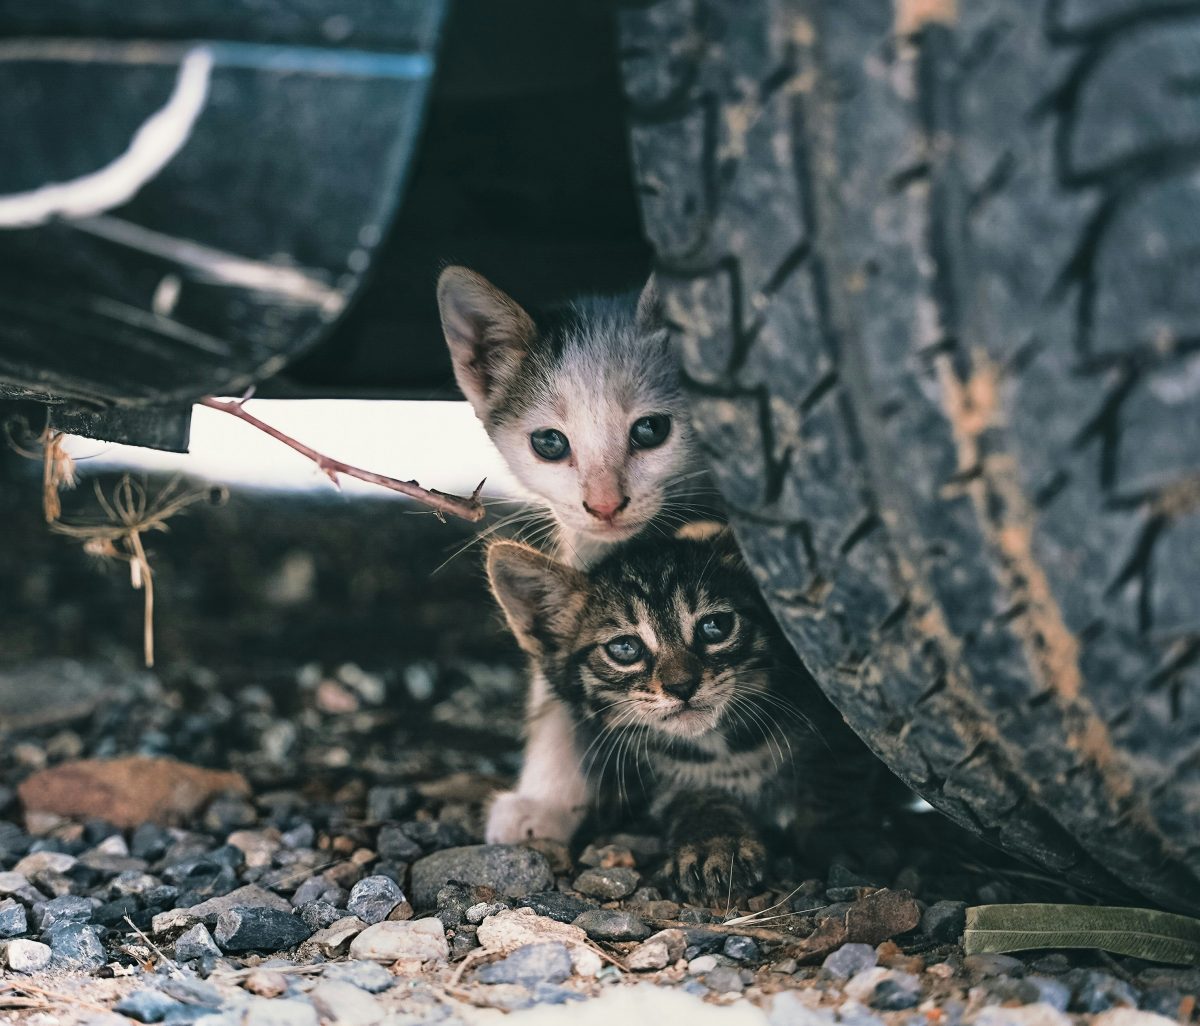 Stray cats who need rescuing from local charities